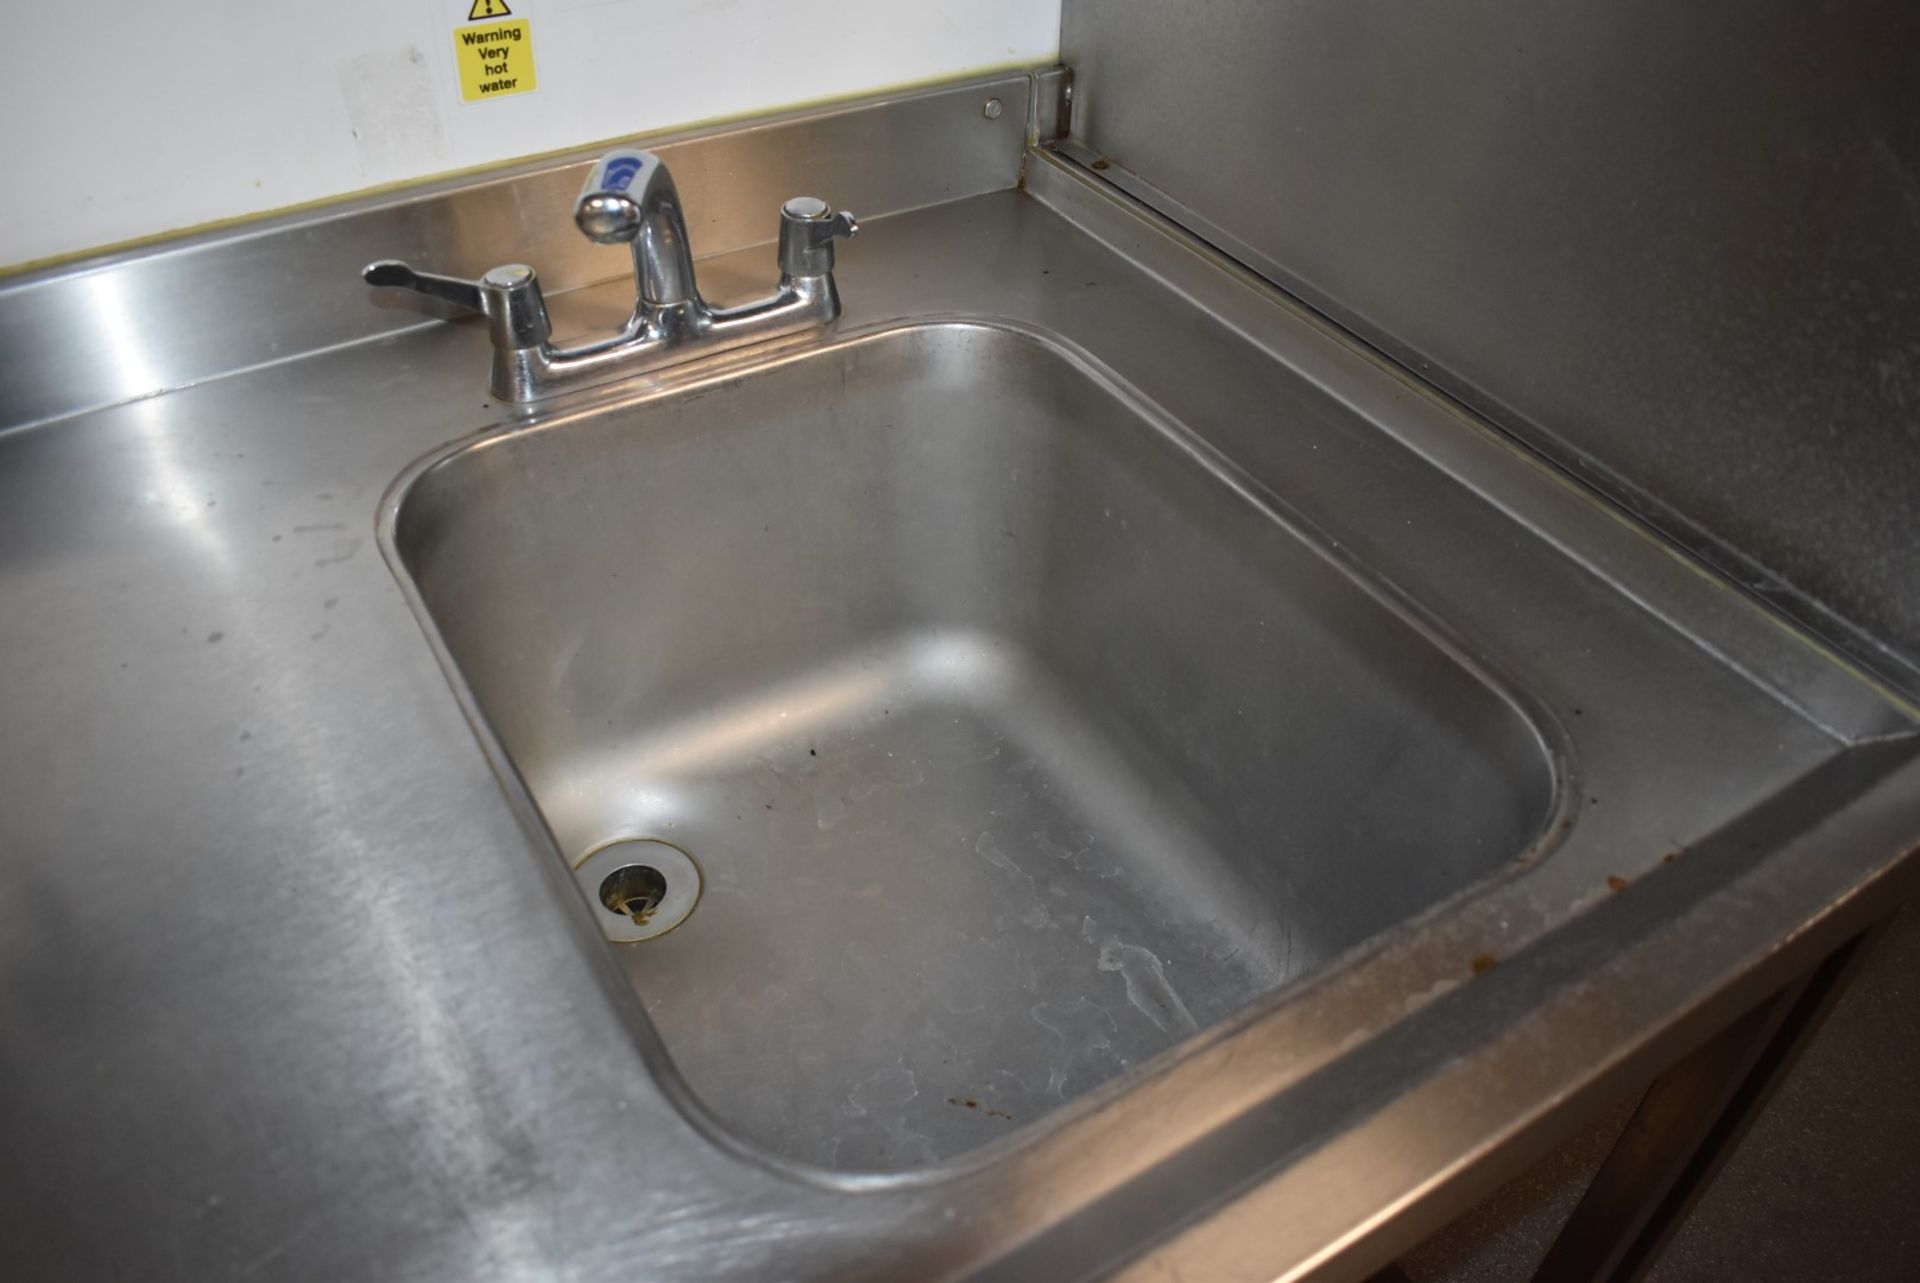 1 x Commercial Wash Unit With Large Sink Bowl, Mixer Tap, Undershelf, Upstand and Anti Spill Surface - Image 3 of 6